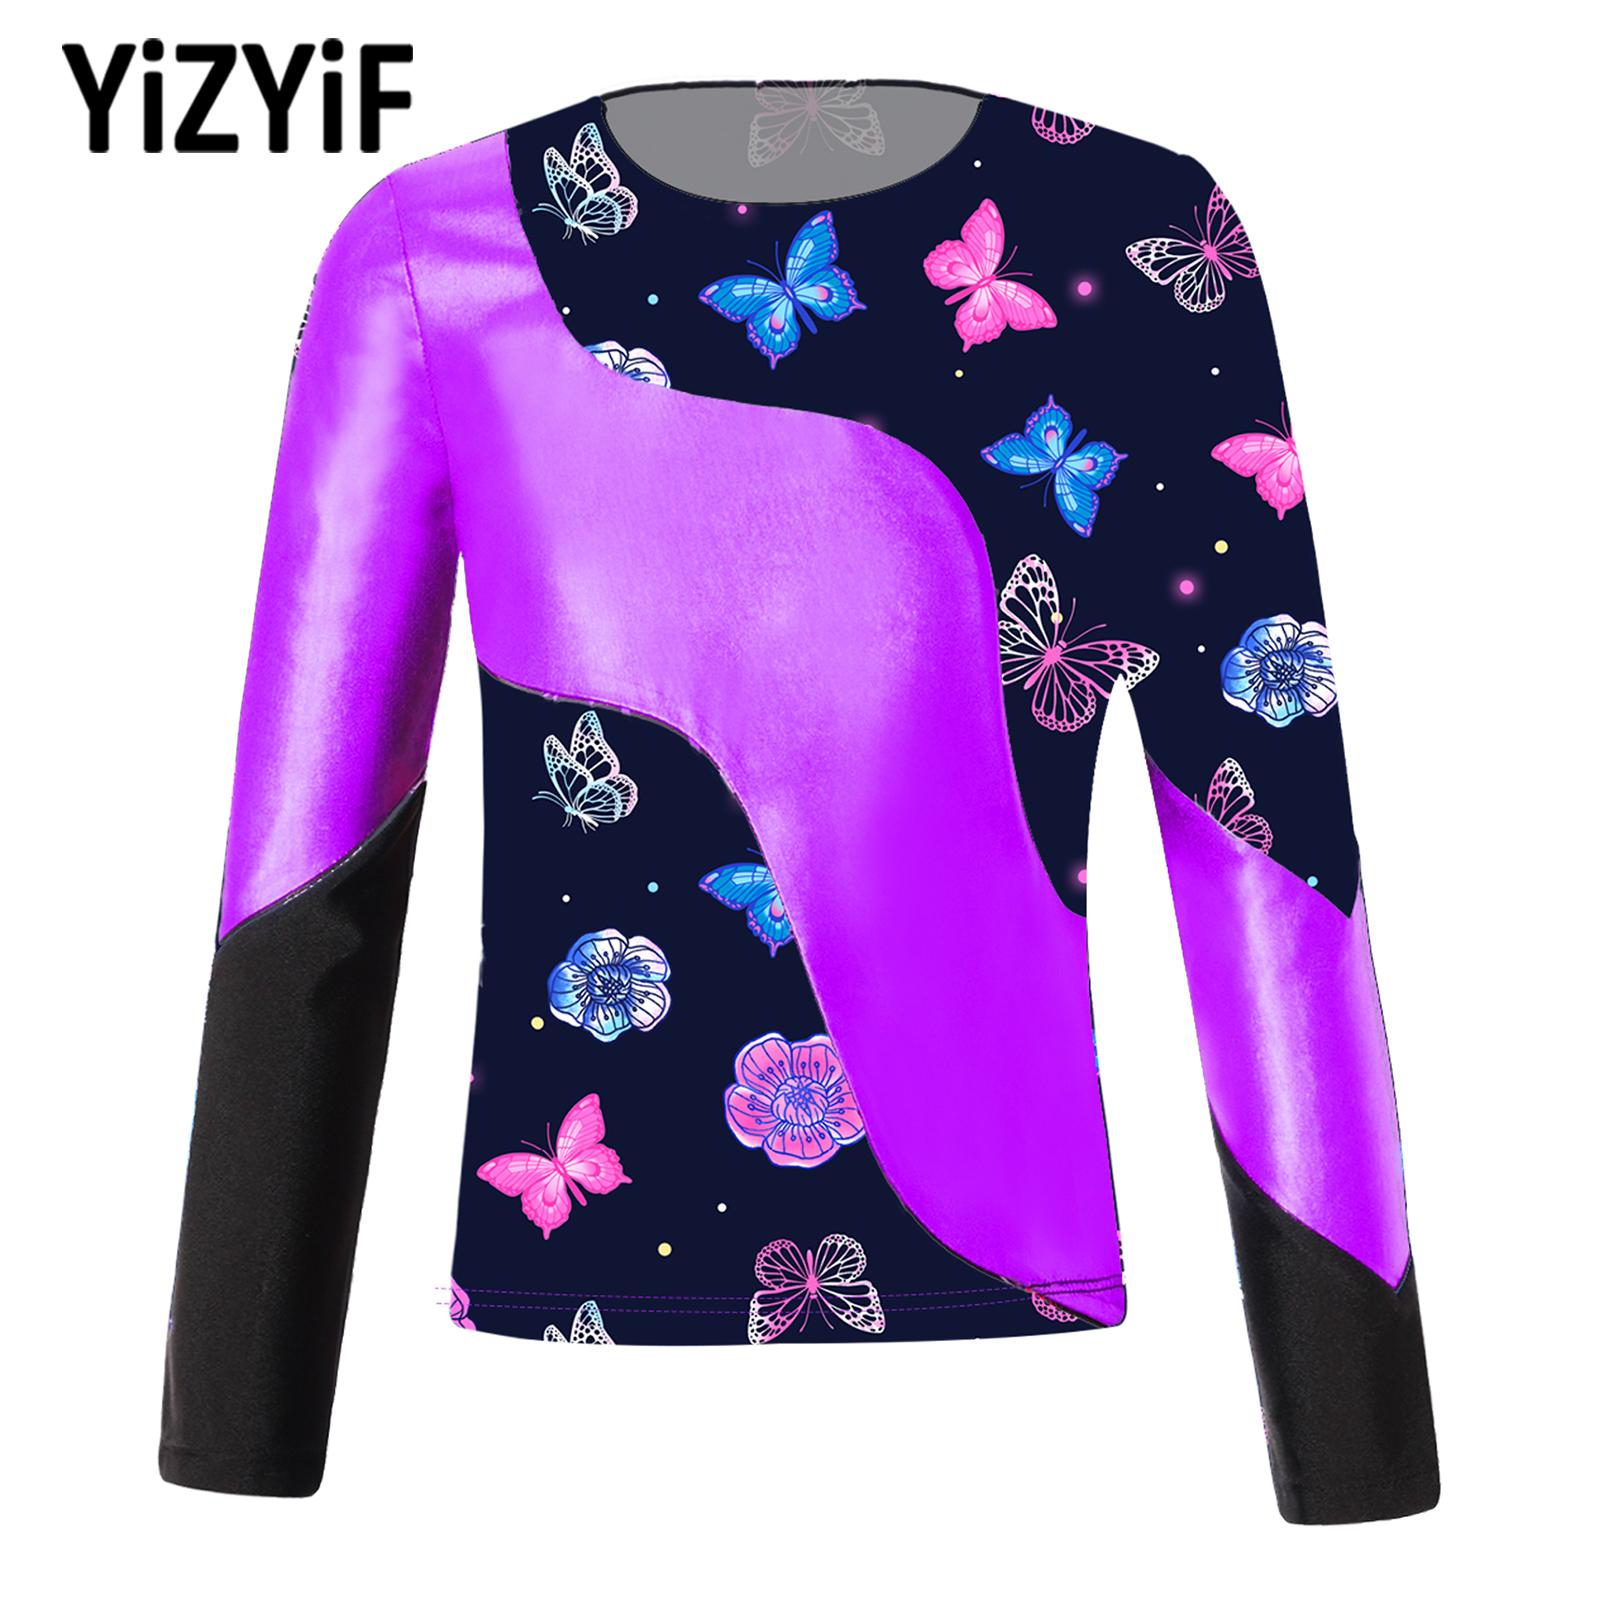 Toddler Kids Girls Lovely Printed Gymnastics Dance Top Costumes Long Sleeve T-shirt Color Block Patchwork Dance Performance Tops